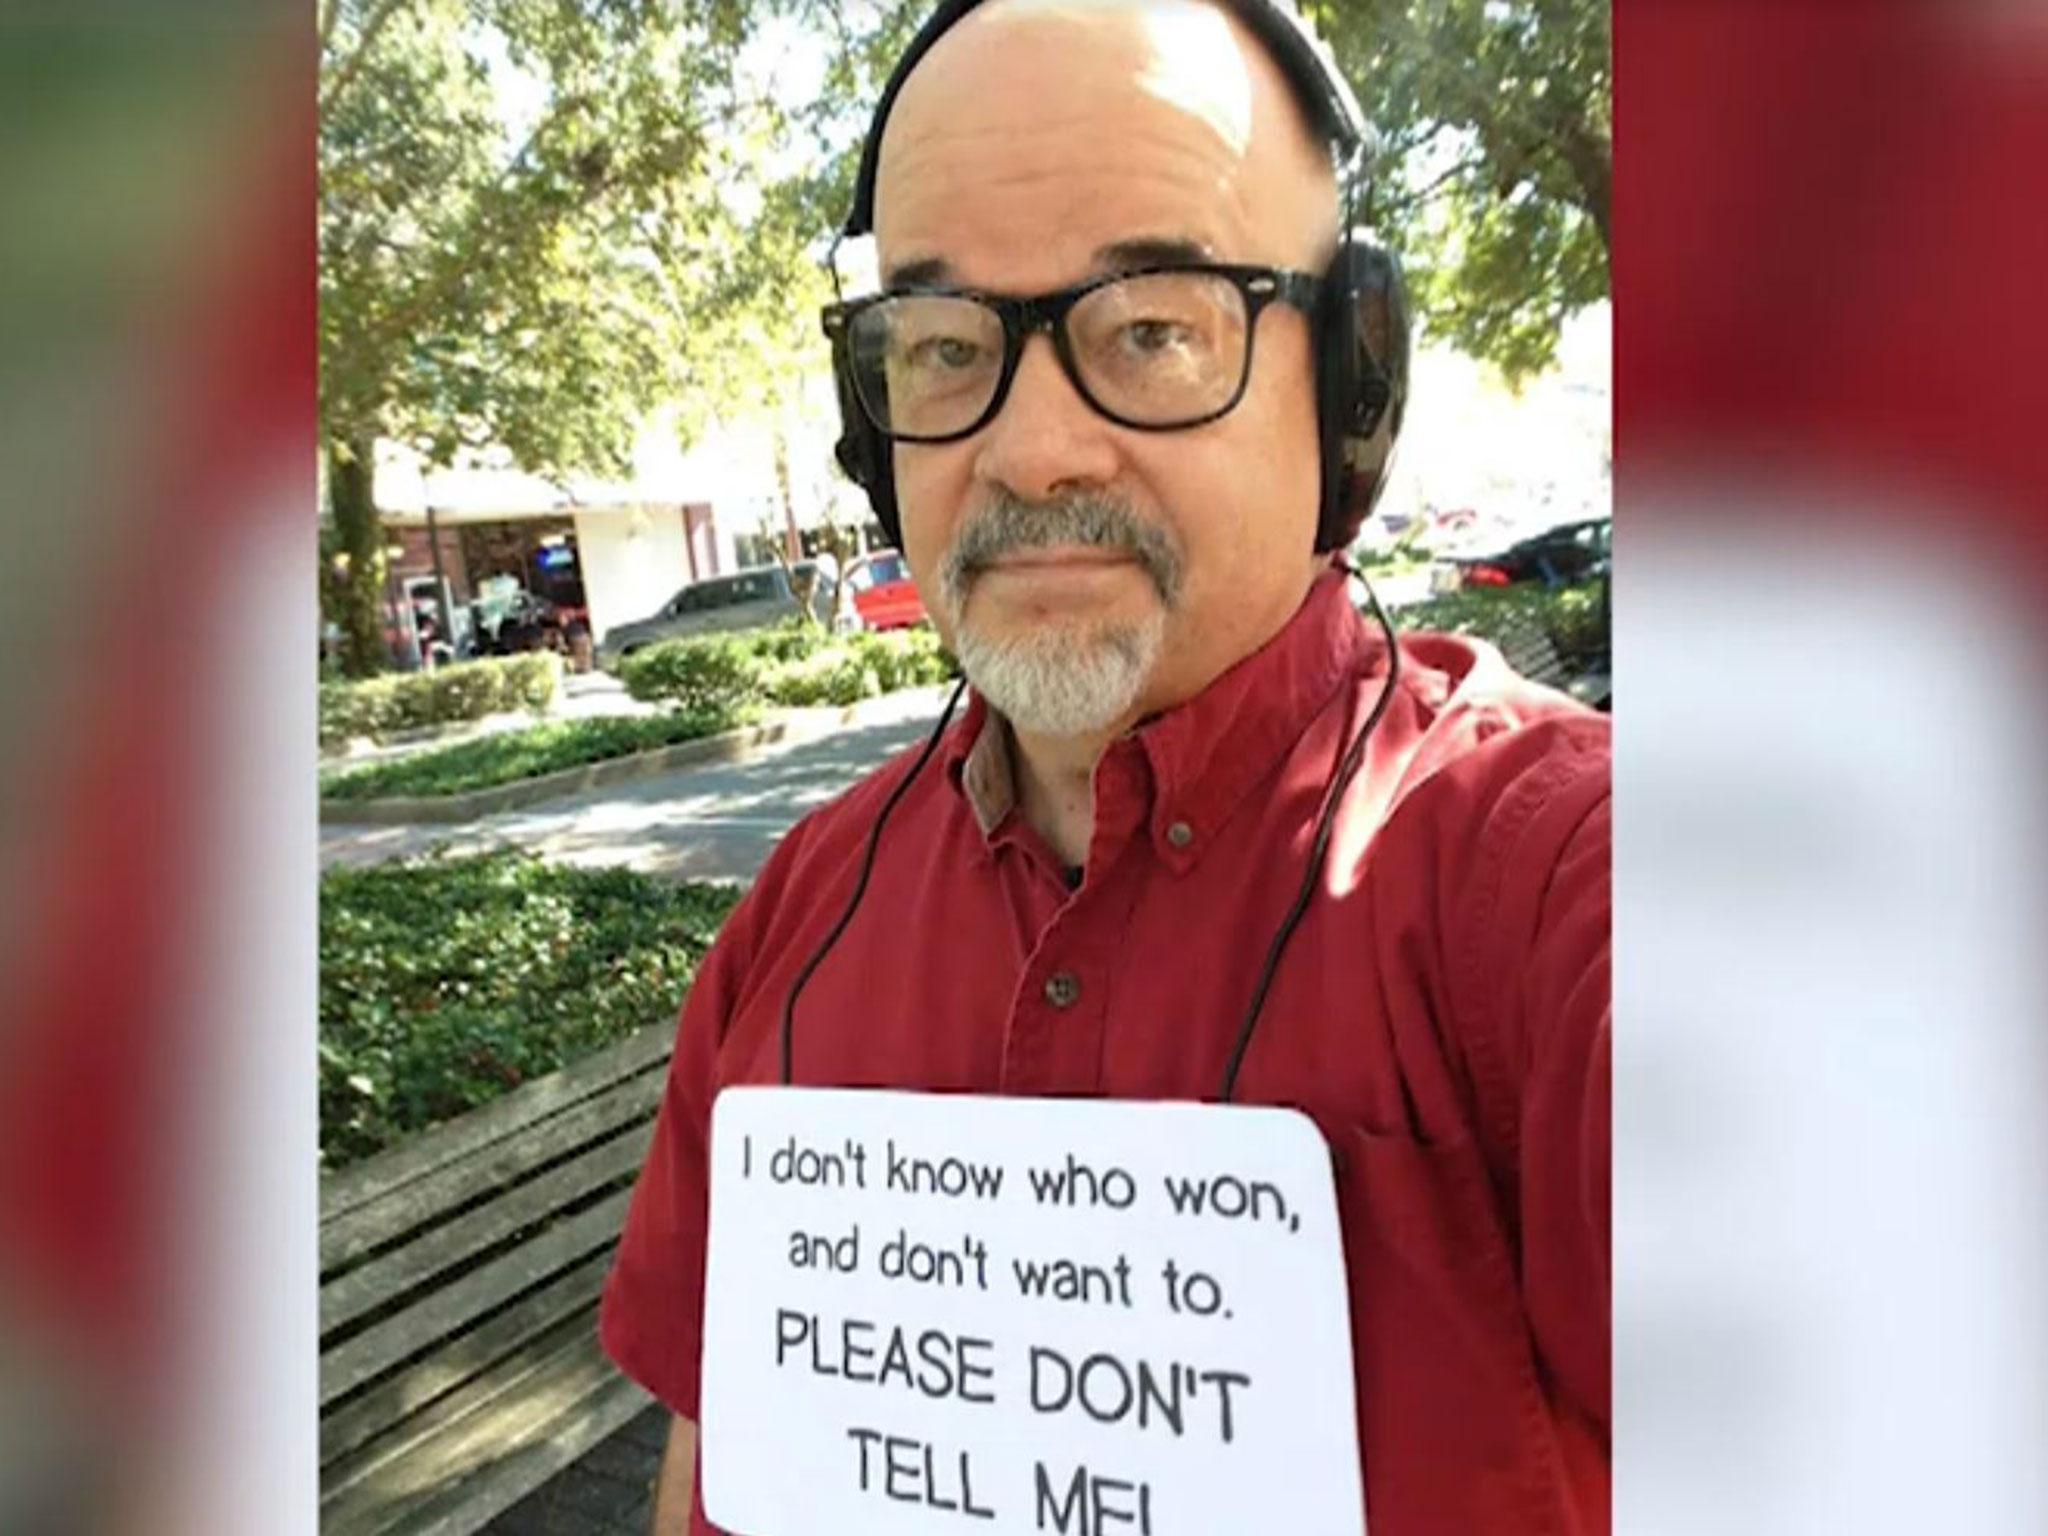 When he does leave his house, Joel Chandler wears headphones and a sign reading: 'I don't know who won, and don't want to. Please don't tell me!'